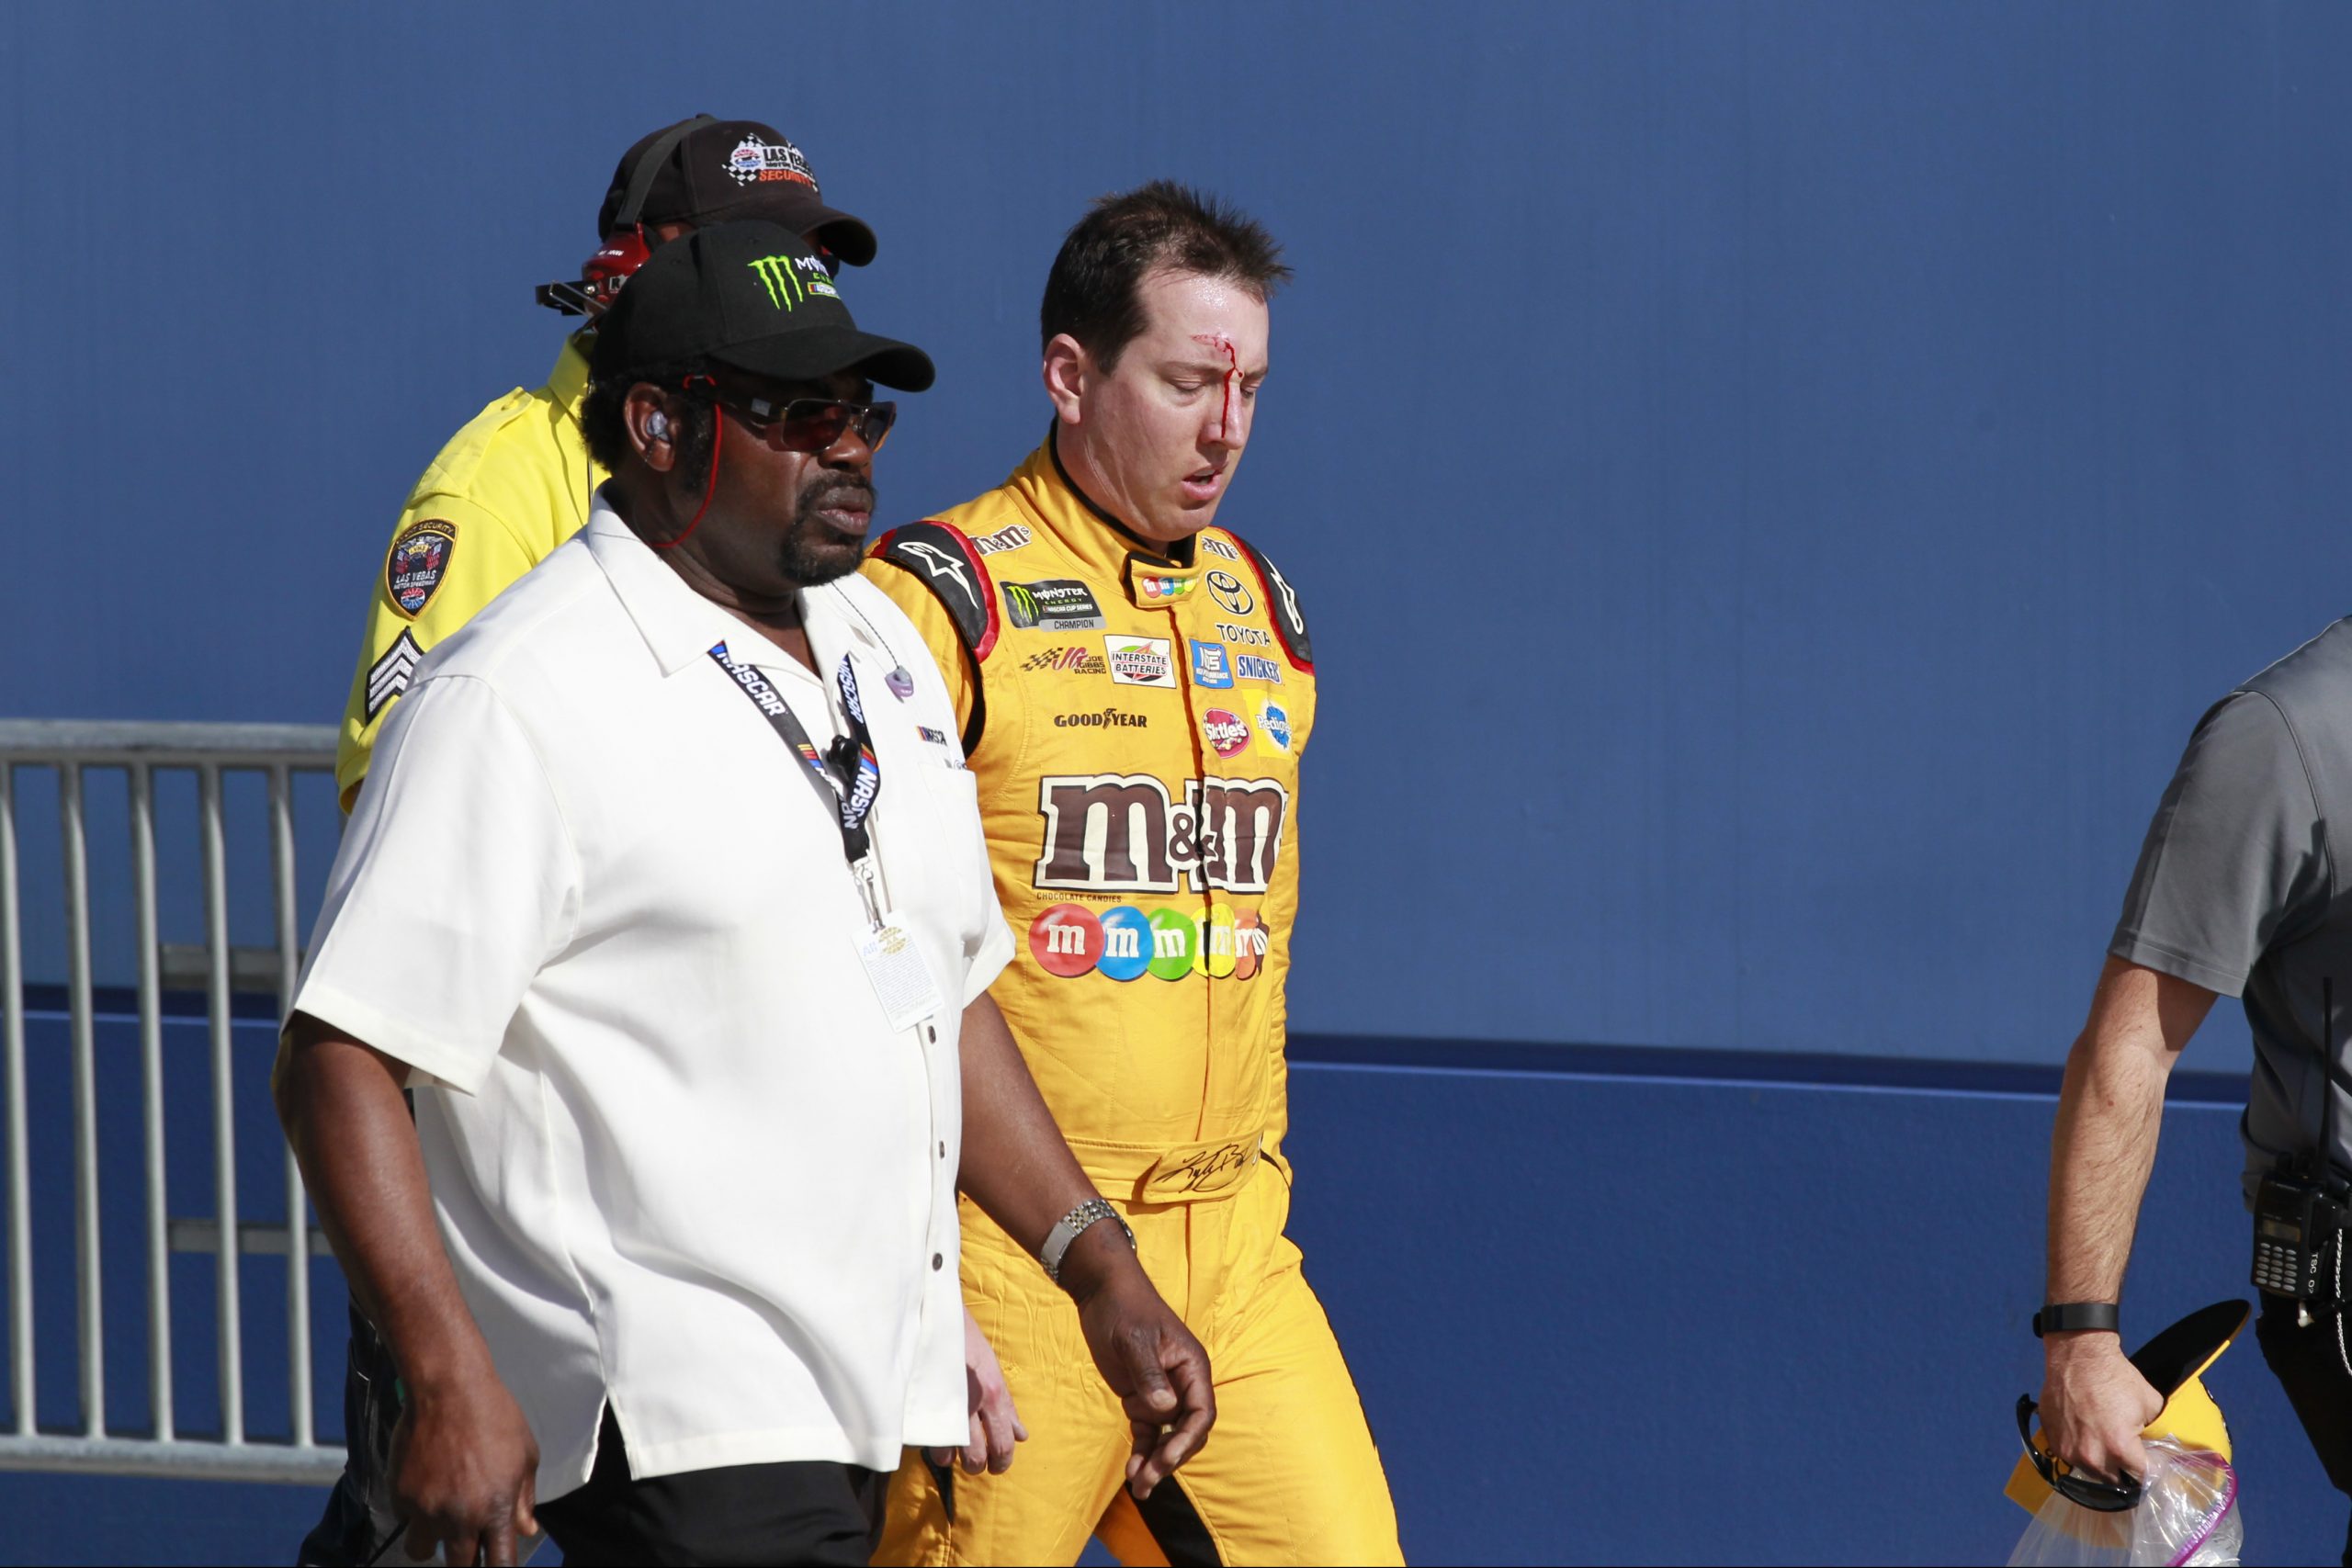 Kyle Busch after fighting with Joey Logano